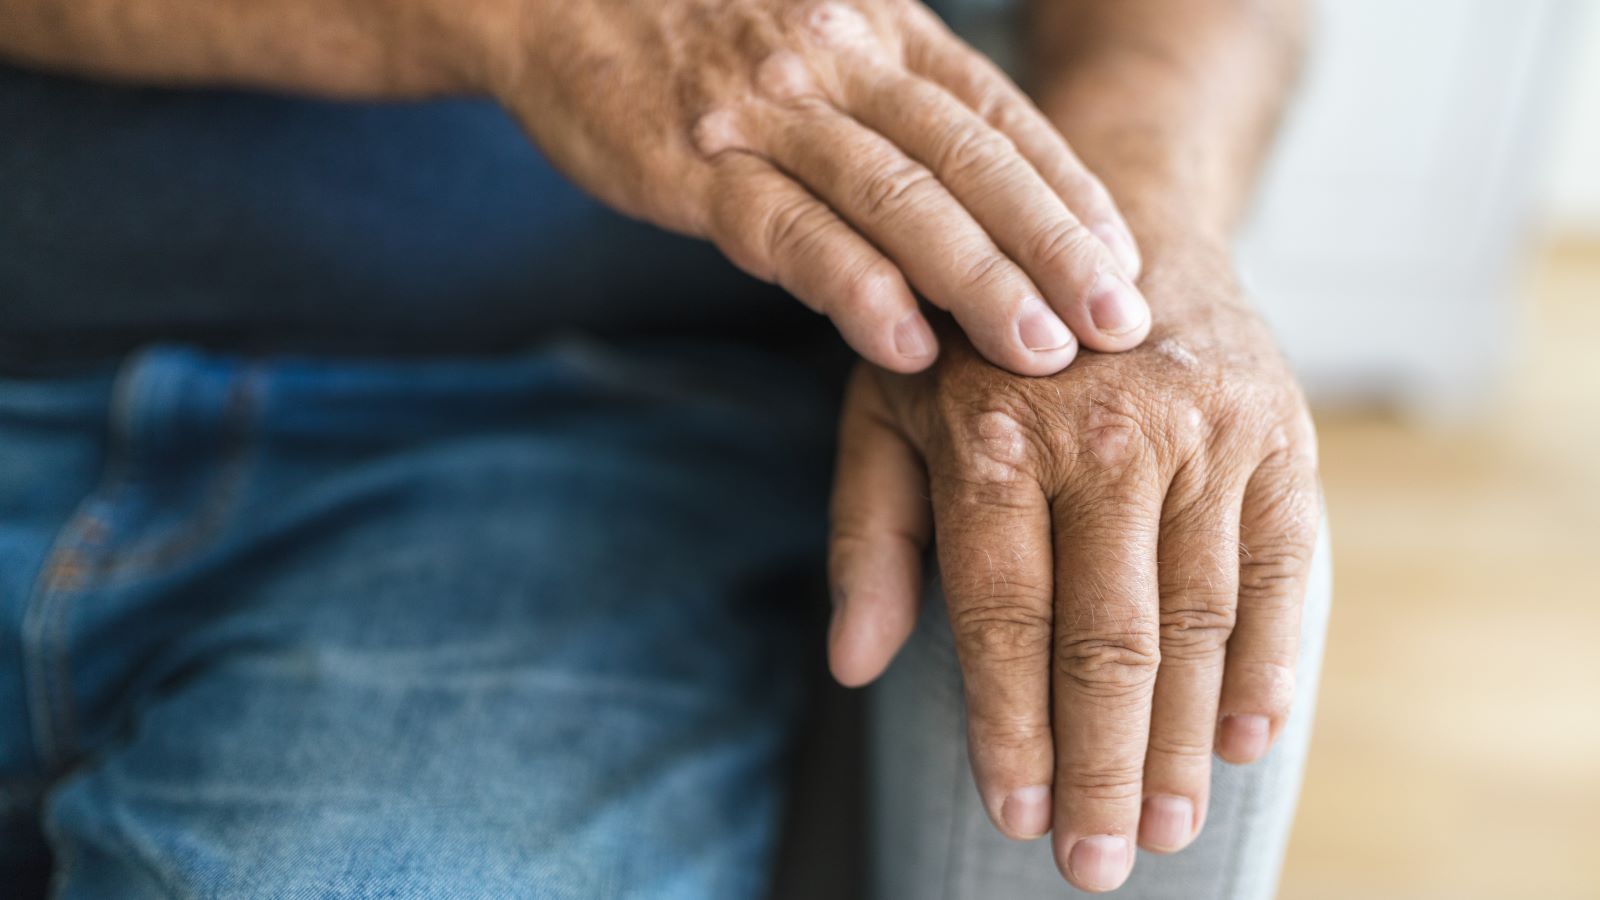 Psoriatic arthritis occurs in up to 30% of people with the skin condition. Here's how you can treat psoriatic arthritis naturally.